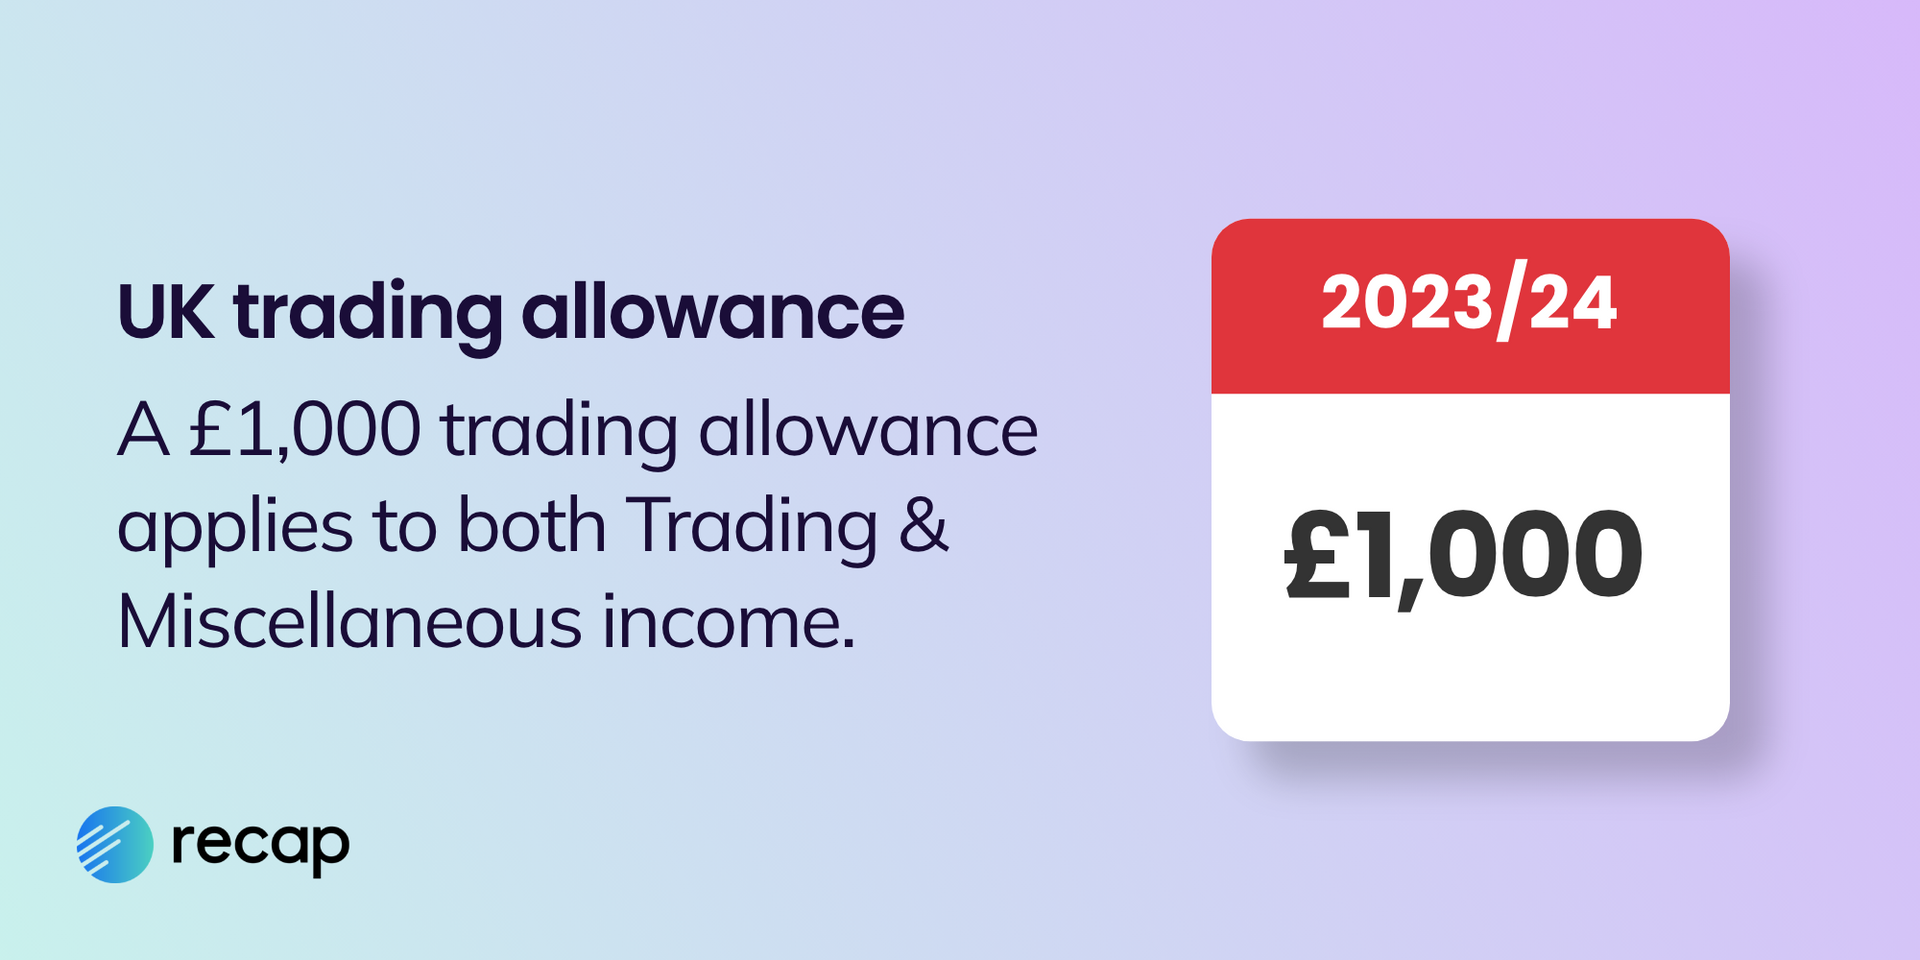 An infograph showing that there is a UK trading allowance of £1,000 that applies to Trading and Miscellaneous income